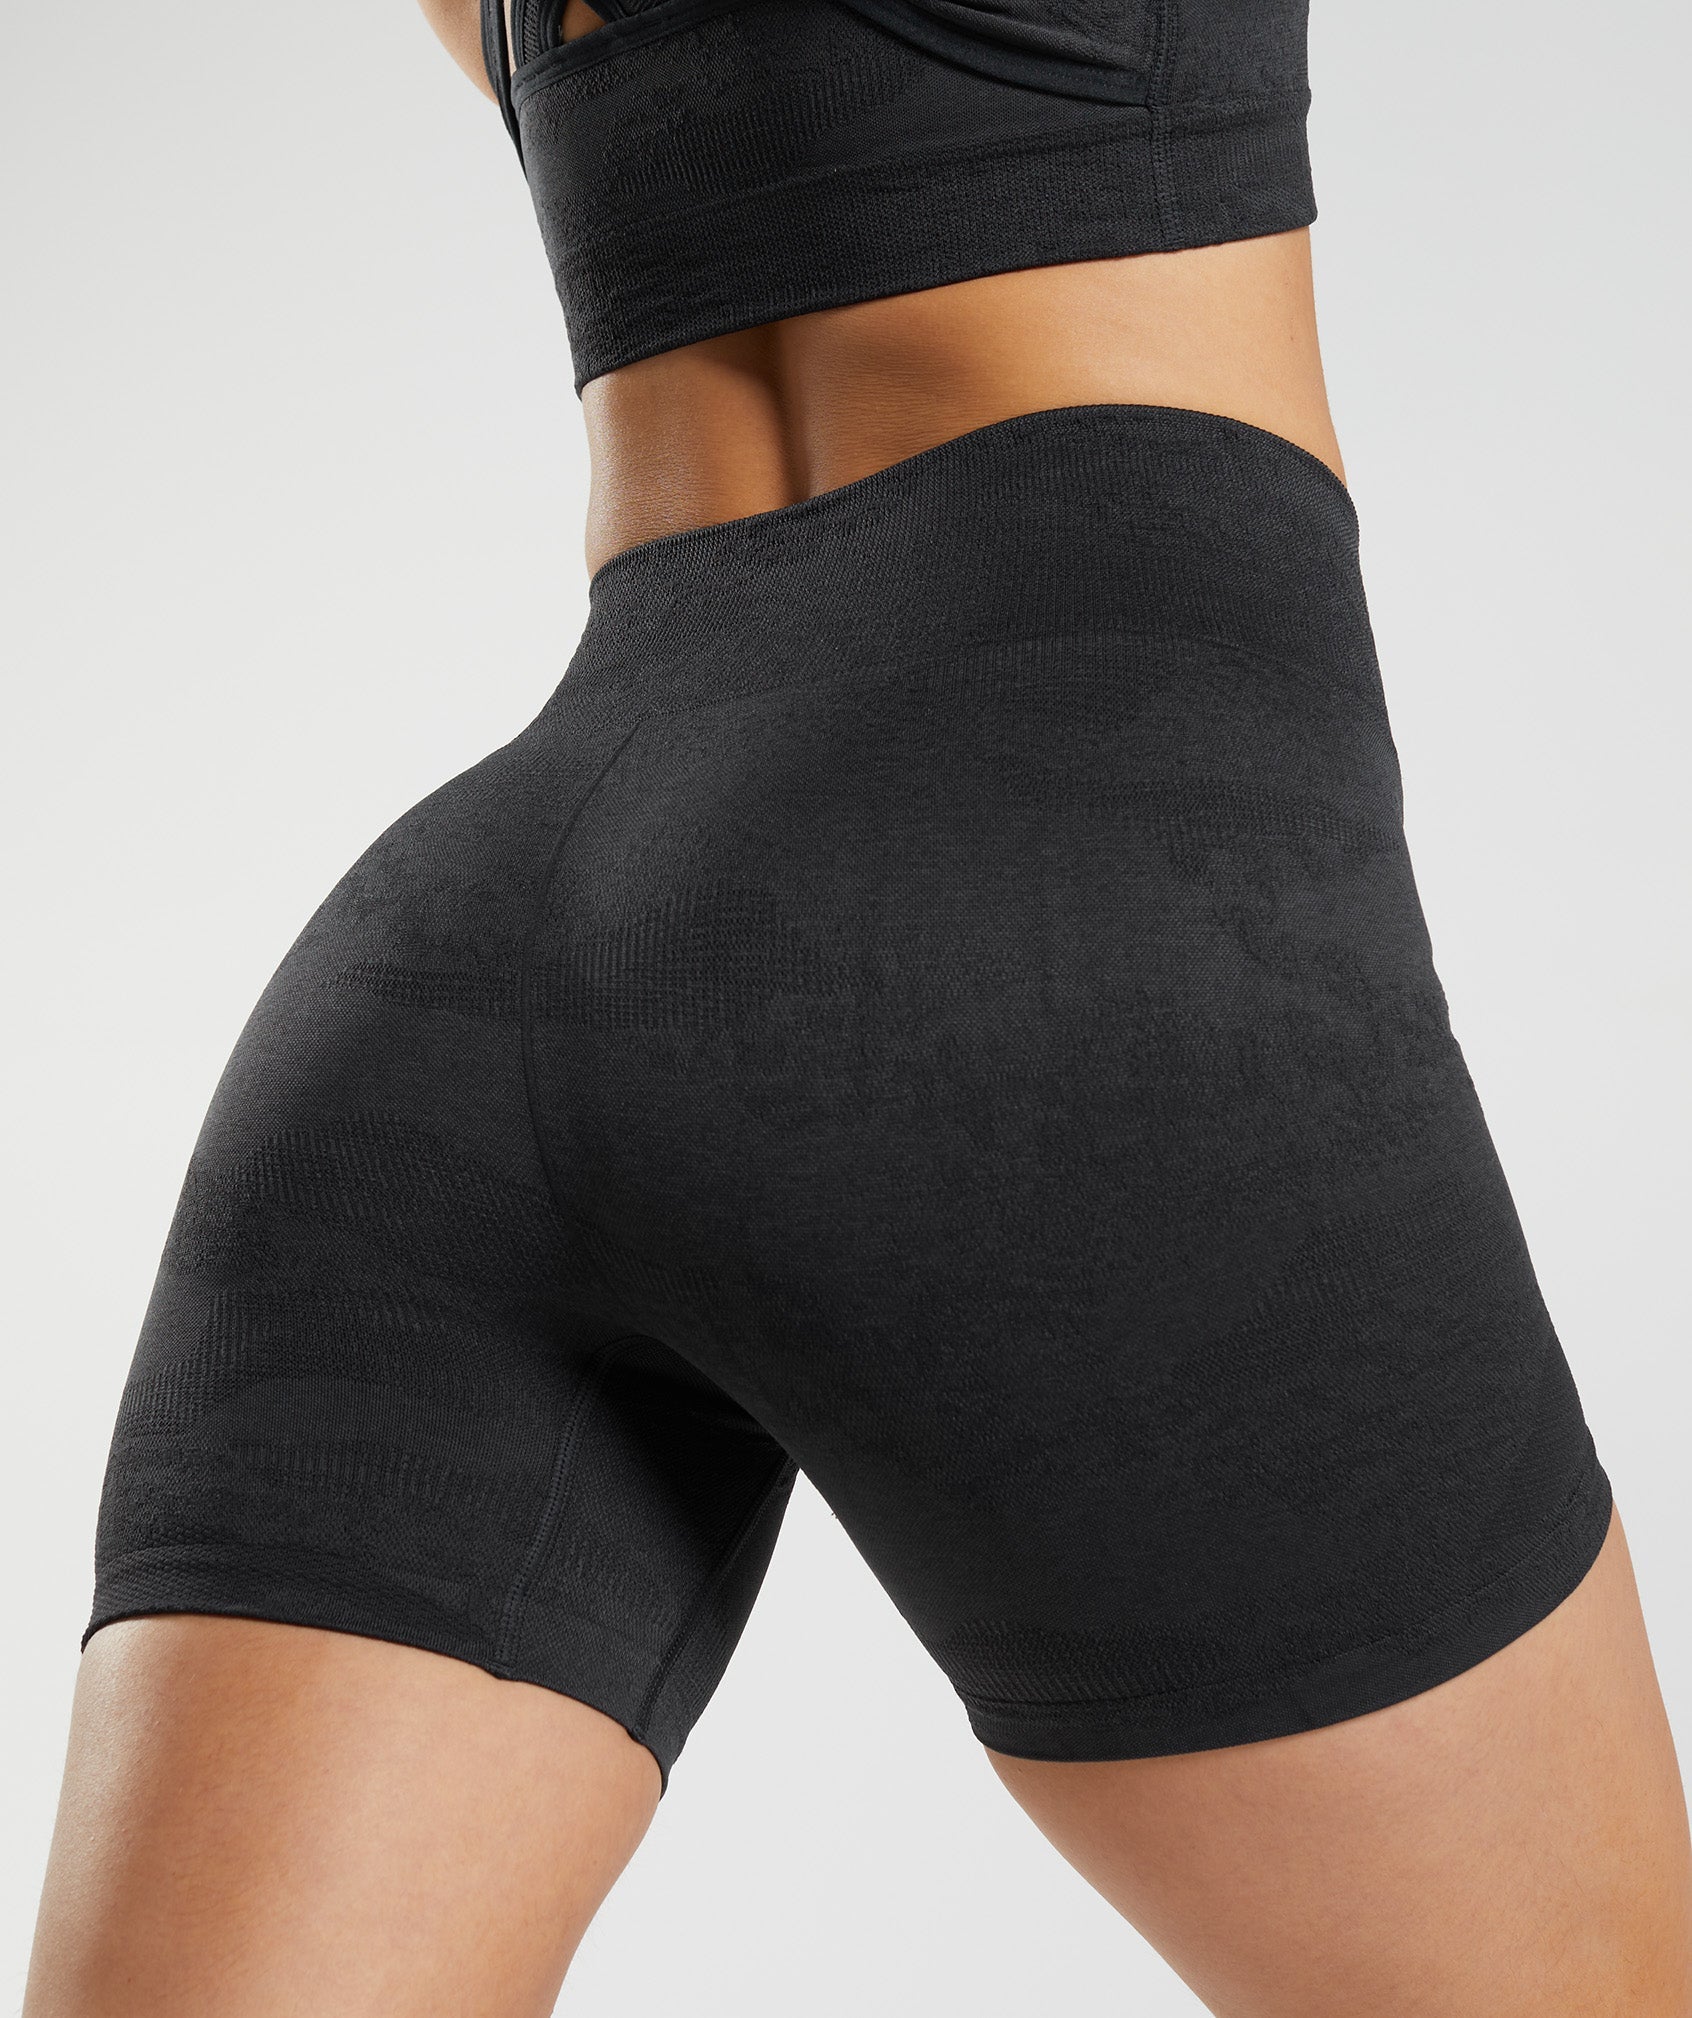 Gymshark Adapt Camo Seamless Shorts Black - $85 New With Tags - From Cute